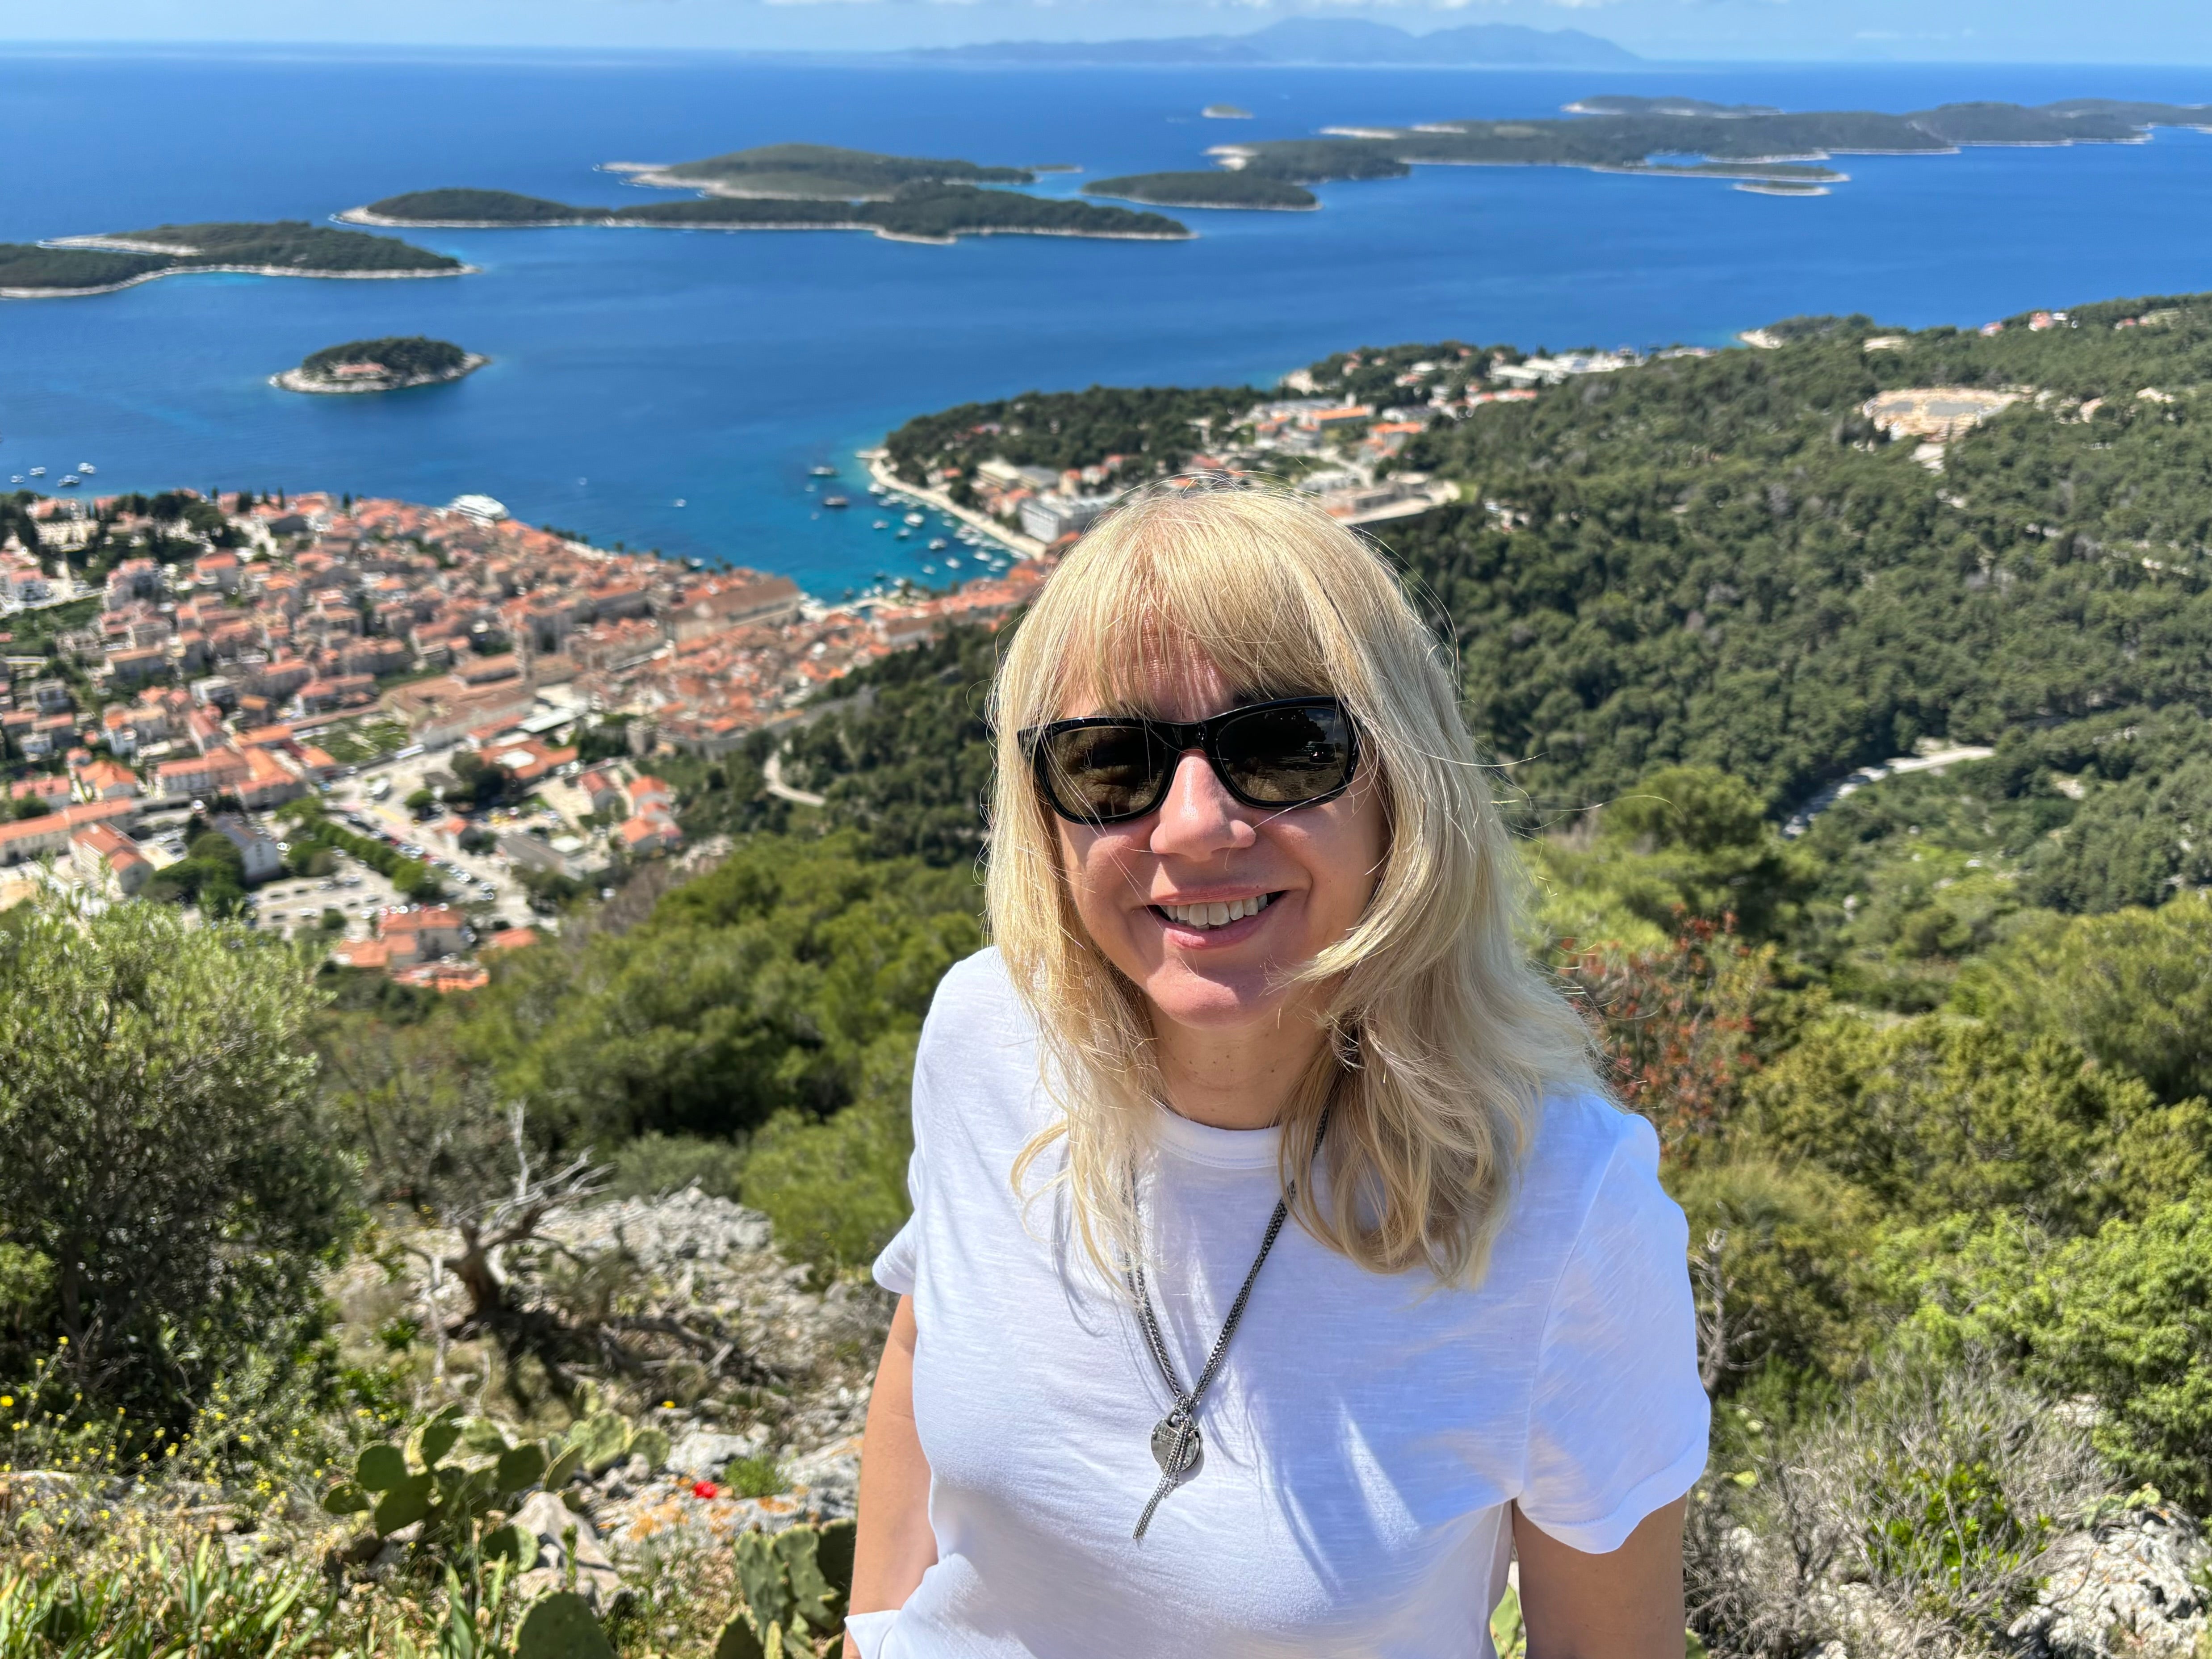 Croatia travel expert Mary Novakovich takes in the glorious views over Hvar Town